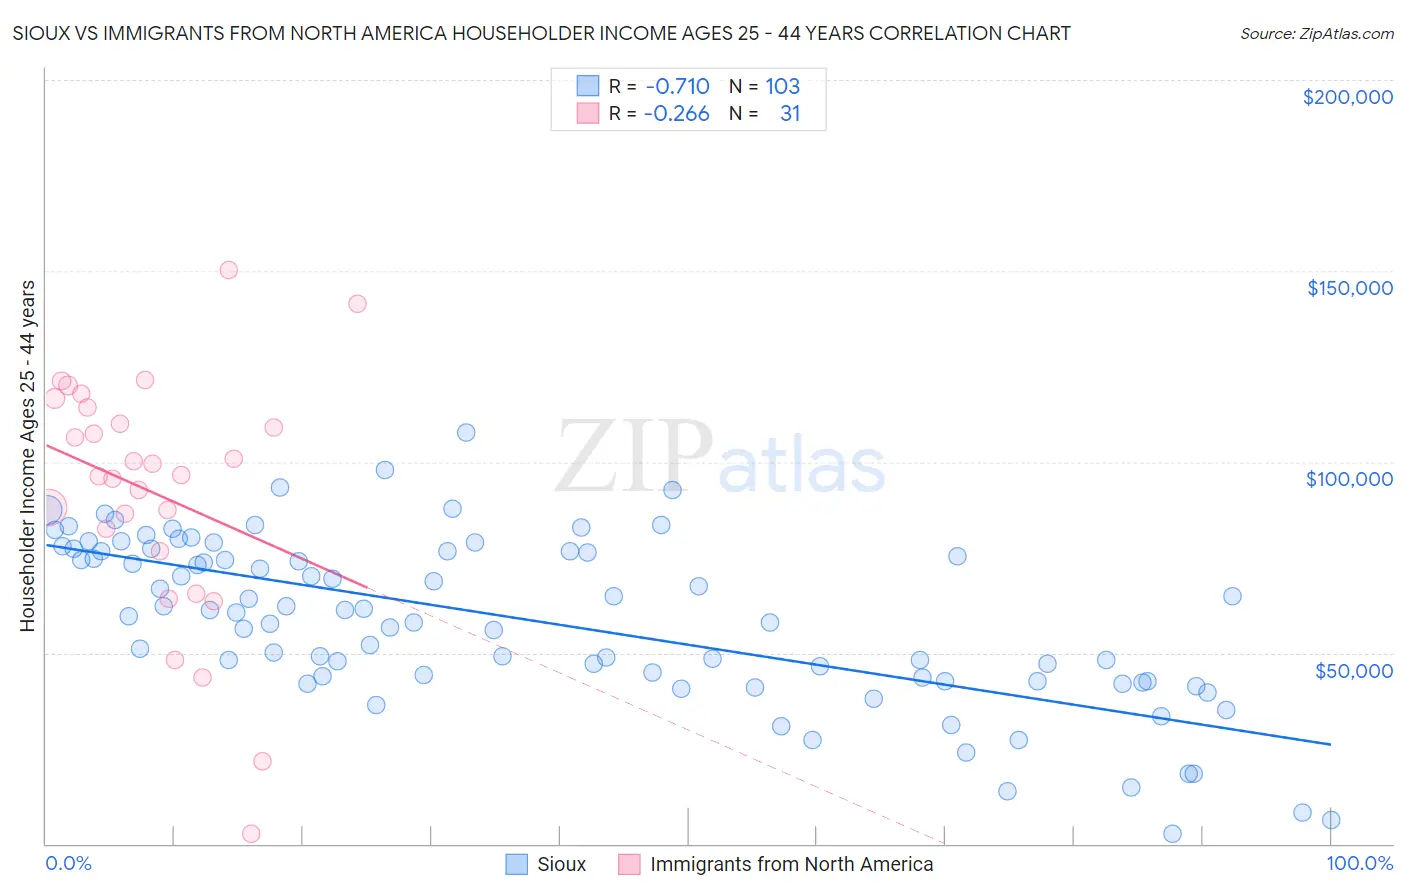 Sioux vs Immigrants from North America Householder Income Ages 25 - 44 years